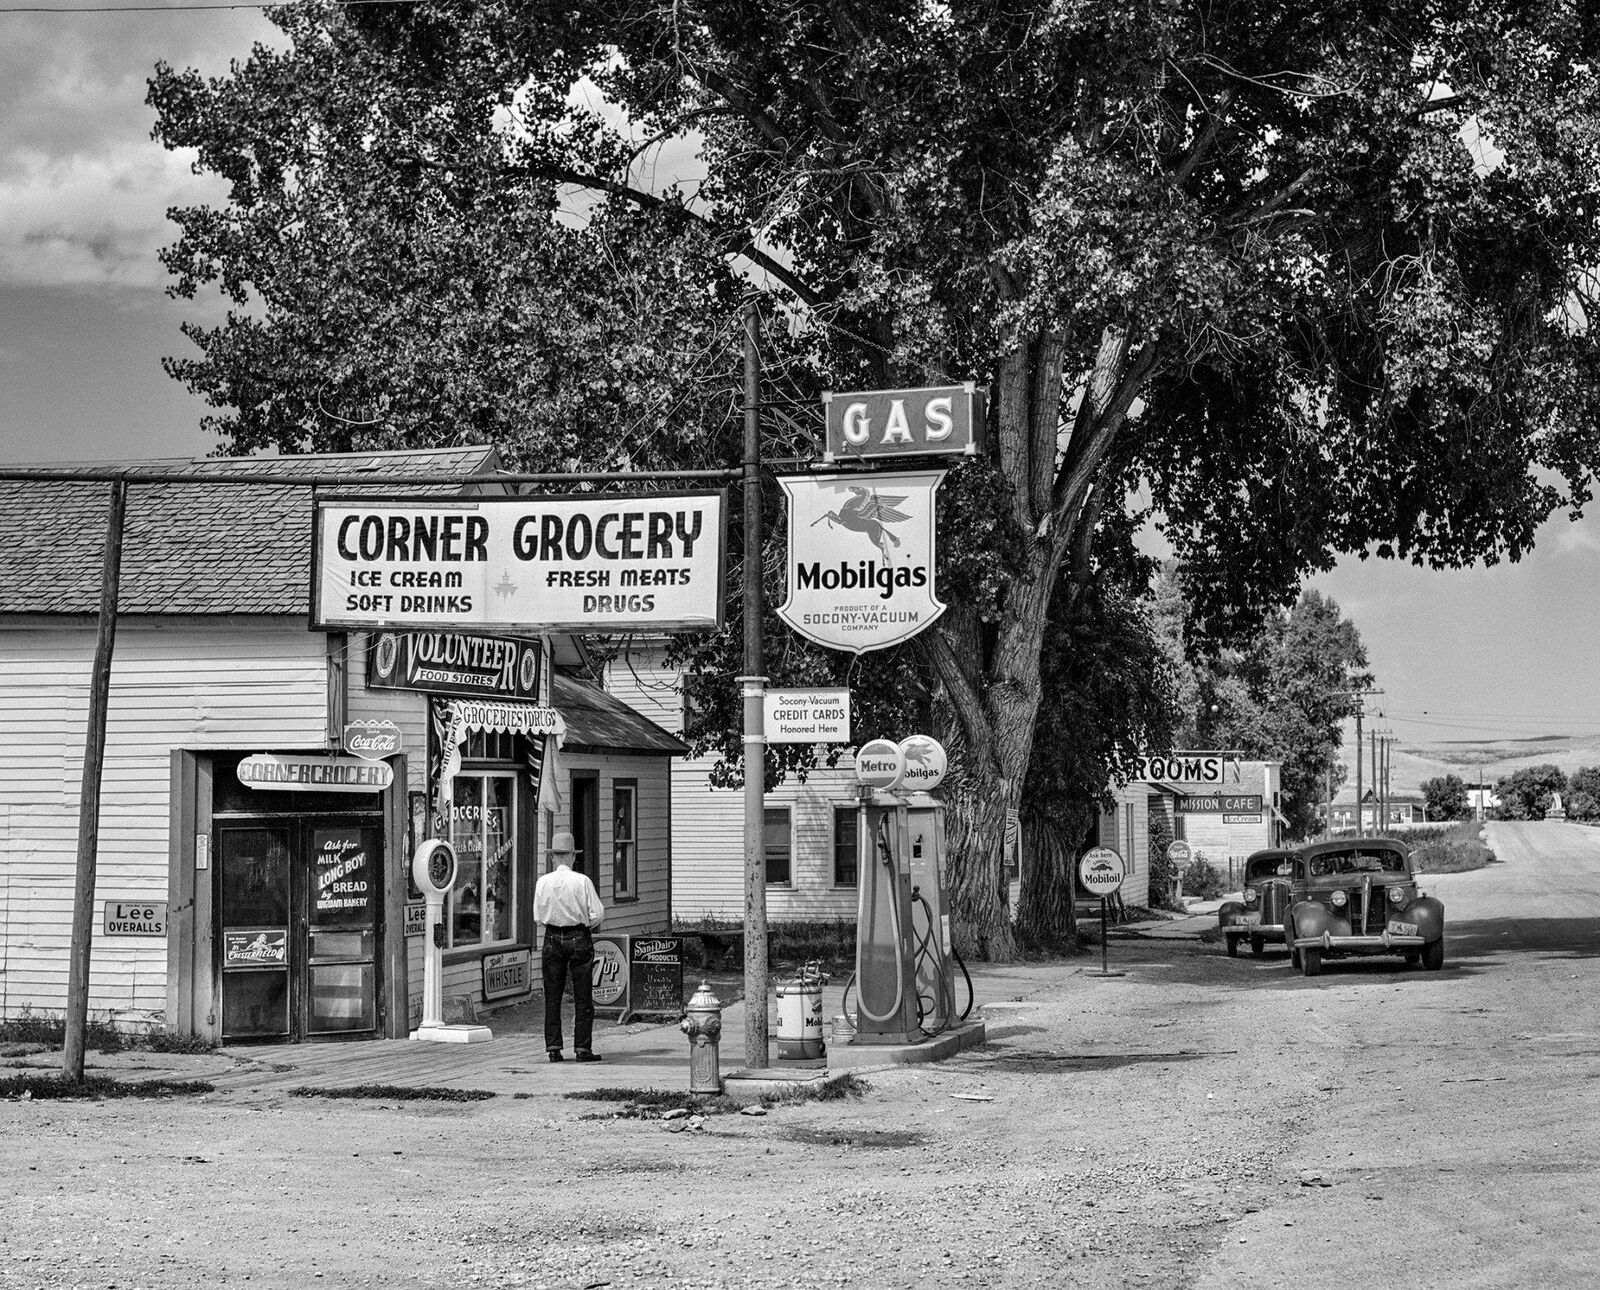 1941 WYOMING GENERAL STORE Mobil Gas 8.5x11 PHOTO  (205-V)